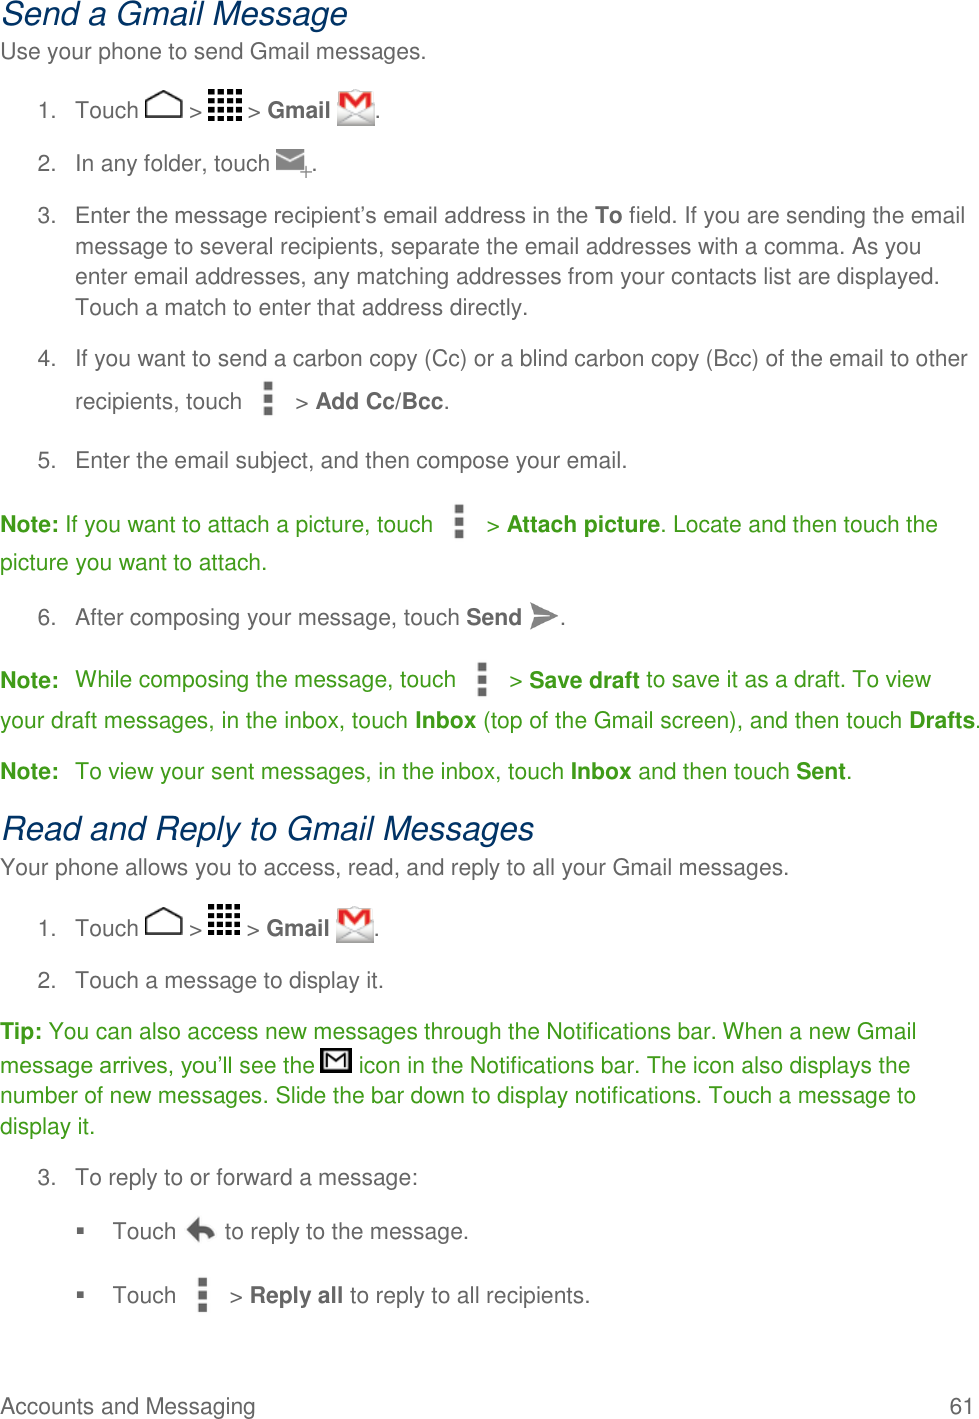 Accounts and Messaging    61 Send a Gmail Message Use your phone to send Gmail messages. 1.  Touch   &gt;   &gt; Gmail  . 2.  In any folder, touch  . 3. Enter the message recipient’s email address in the To field. If you are sending the email message to several recipients, separate the email addresses with a comma. As you enter email addresses, any matching addresses from your contacts list are displayed. Touch a match to enter that address directly. 4.  If you want to send a carbon copy (Cc) or a blind carbon copy (Bcc) of the email to other recipients, touch   &gt; Add Cc/Bcc. 5.  Enter the email subject, and then compose your email. Note: If you want to attach a picture, touch   &gt; Attach picture. Locate and then touch the picture you want to attach. 6.  After composing your message, touch Send  . Note:  While composing the message, touch   &gt; Save draft to save it as a draft. To view your draft messages, in the inbox, touch Inbox (top of the Gmail screen), and then touch Drafts. Note:  To view your sent messages, in the inbox, touch Inbox and then touch Sent. Read and Reply to Gmail Messages Your phone allows you to access, read, and reply to all your Gmail messages. 1.  Touch   &gt;   &gt; Gmail  . 2.  Touch a message to display it. Tip: You can also access new messages through the Notifications bar. When a new Gmail message arrives, you’ll see the   icon in the Notifications bar. The icon also displays the number of new messages. Slide the bar down to display notifications. Touch a message to display it. 3.  To reply to or forward a message:   Touch   to reply to the message.   Touch   &gt; Reply all to reply to all recipients. 